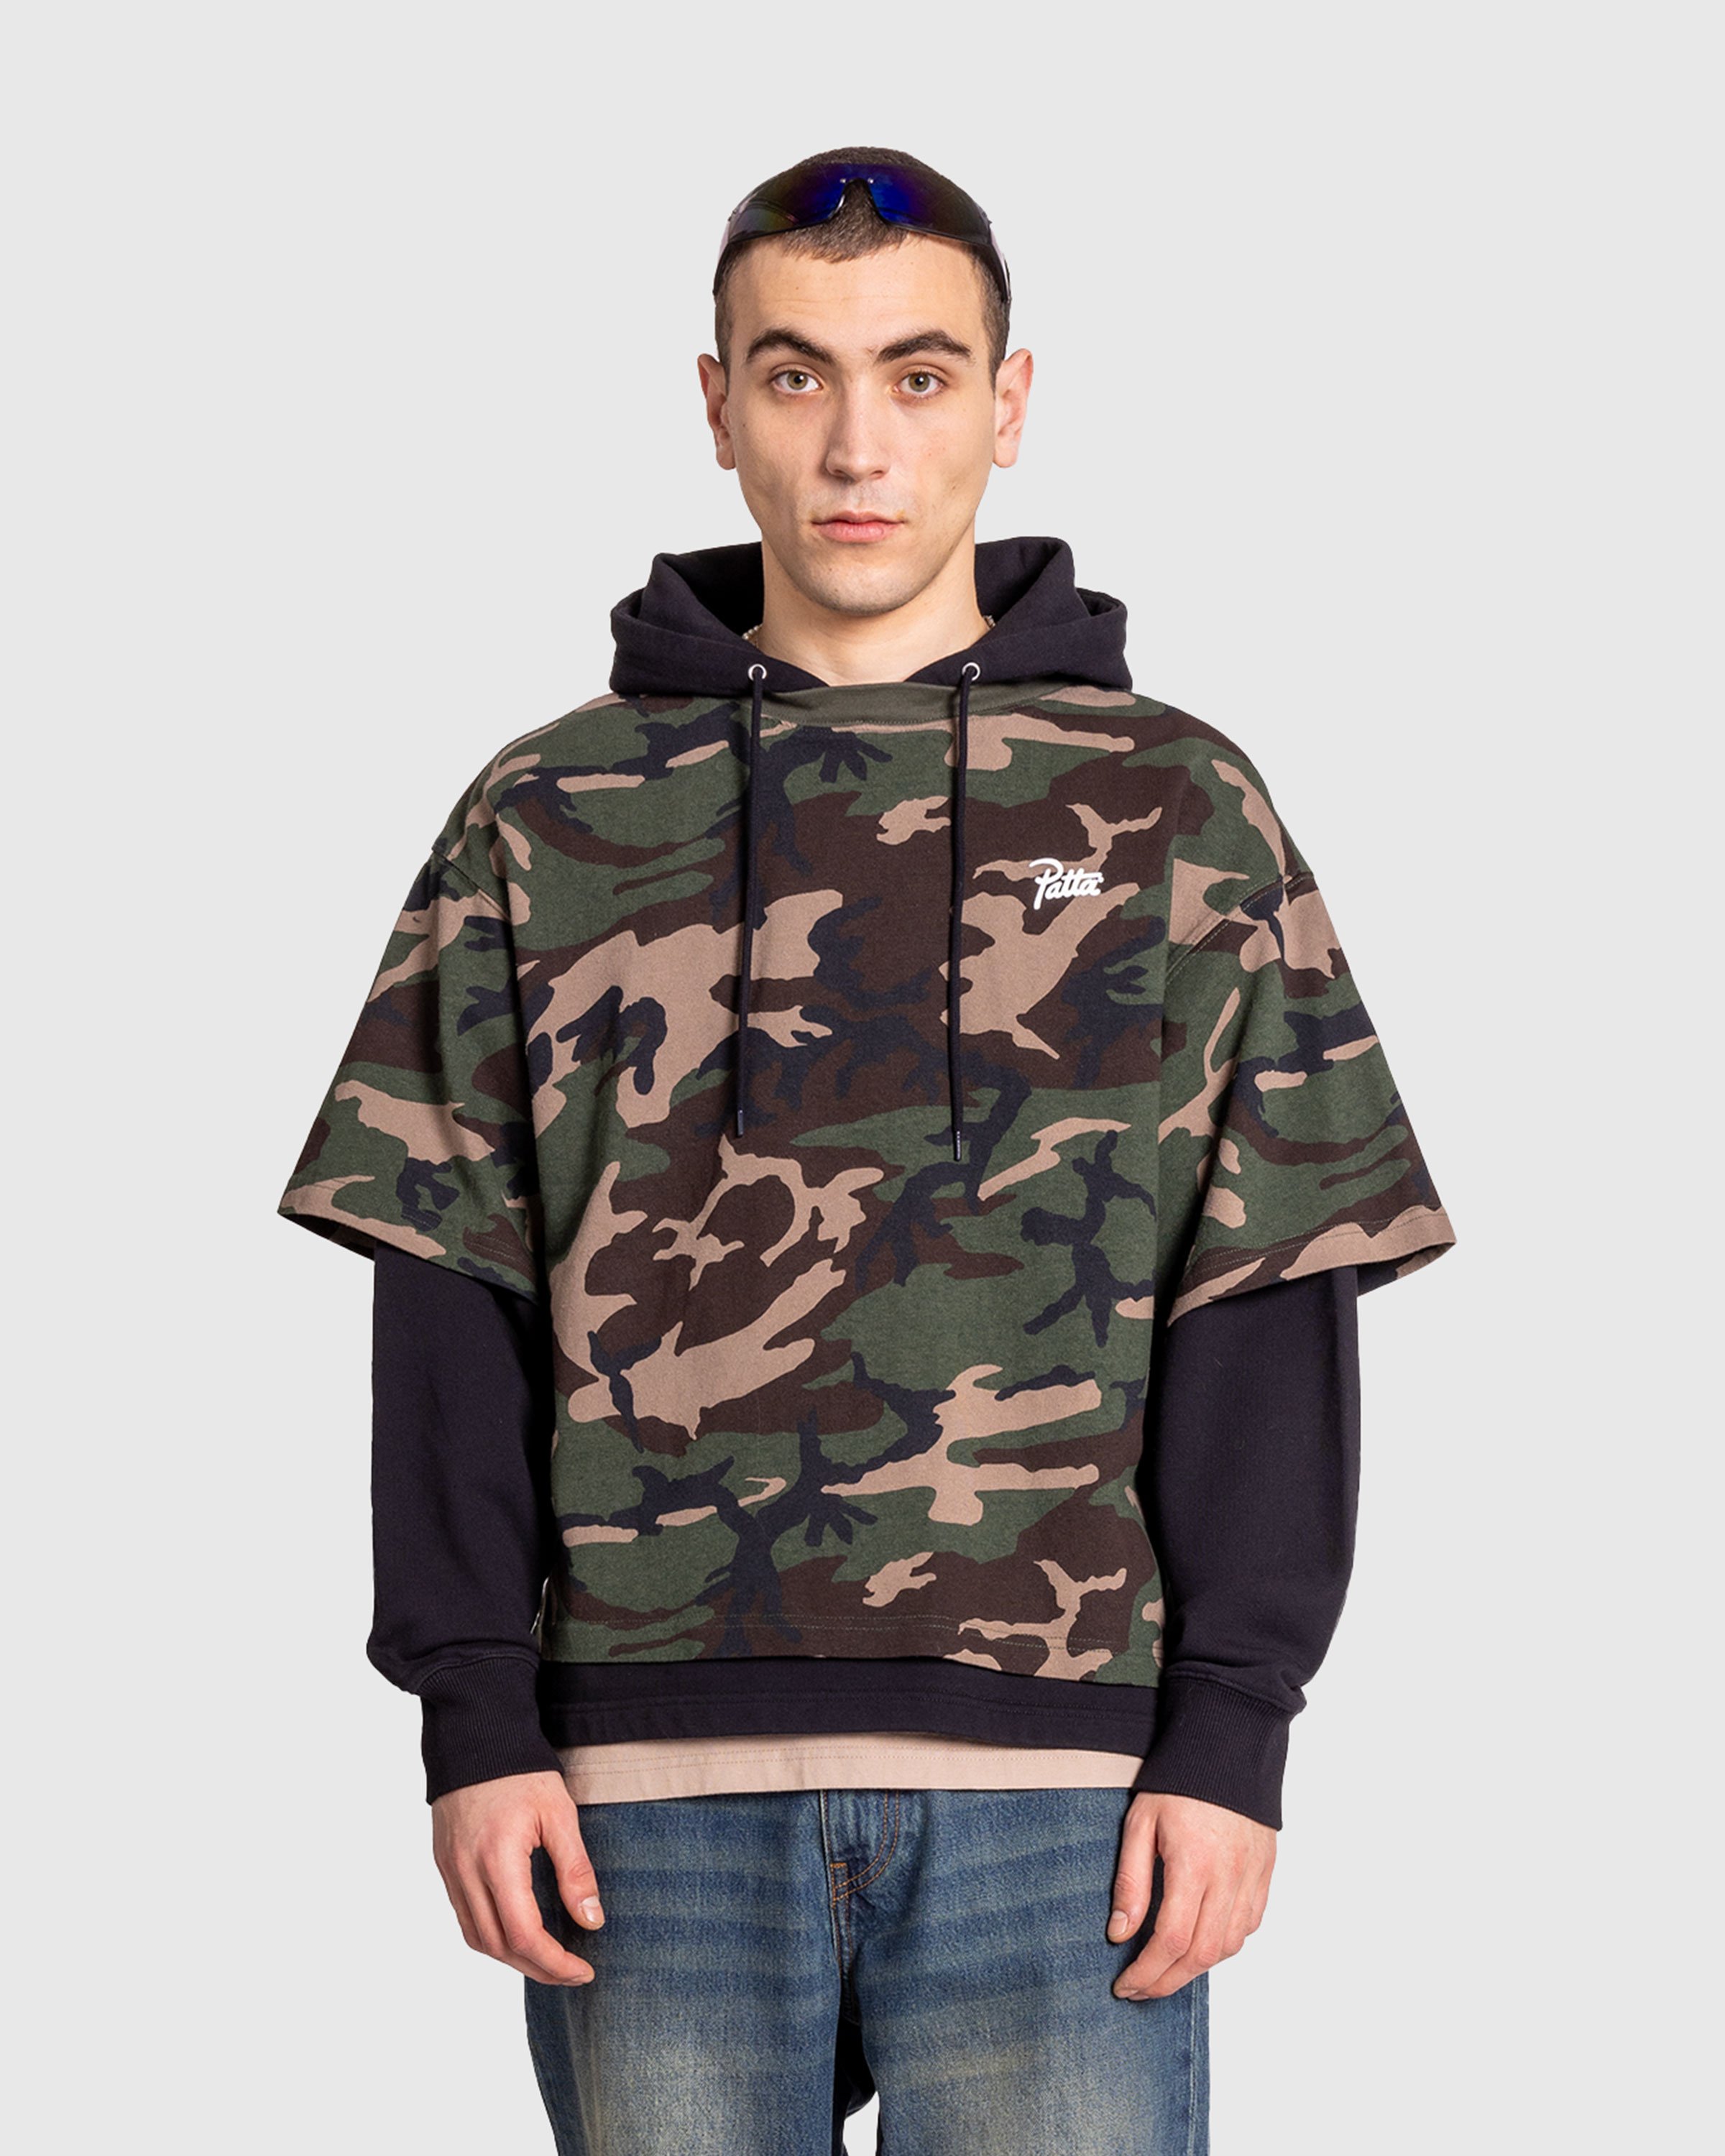 Patta - Always On Top Hooded Sweater Multi - Clothing - Multi - Image 2